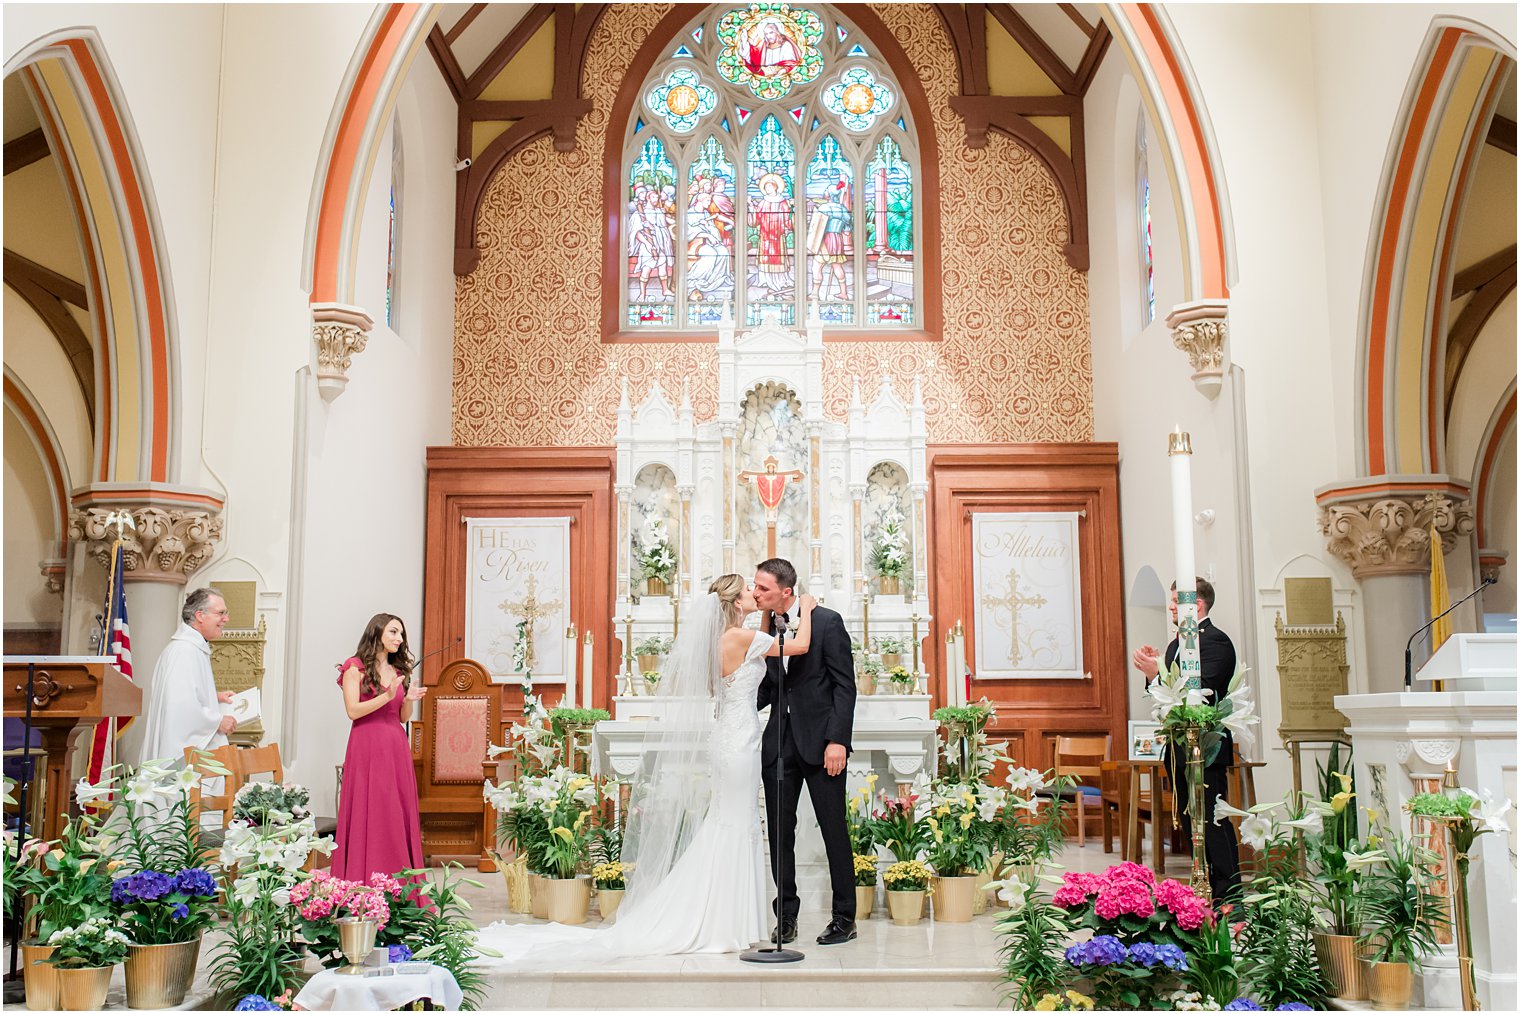 newlyweds kiss during traditional Catholic Church wedding in New Jersey